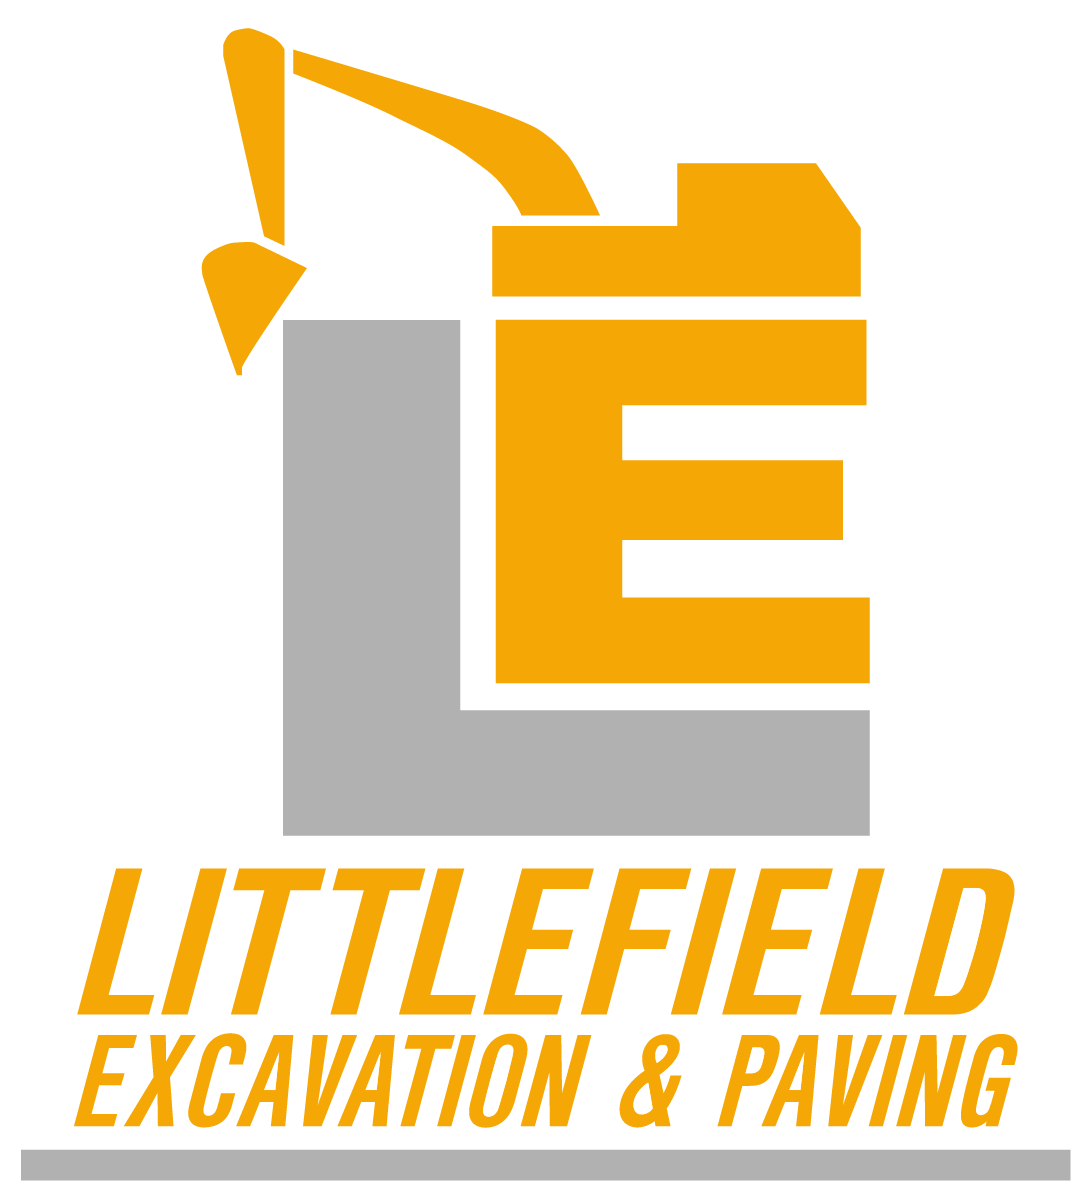 Littlefield Excavation and Paving